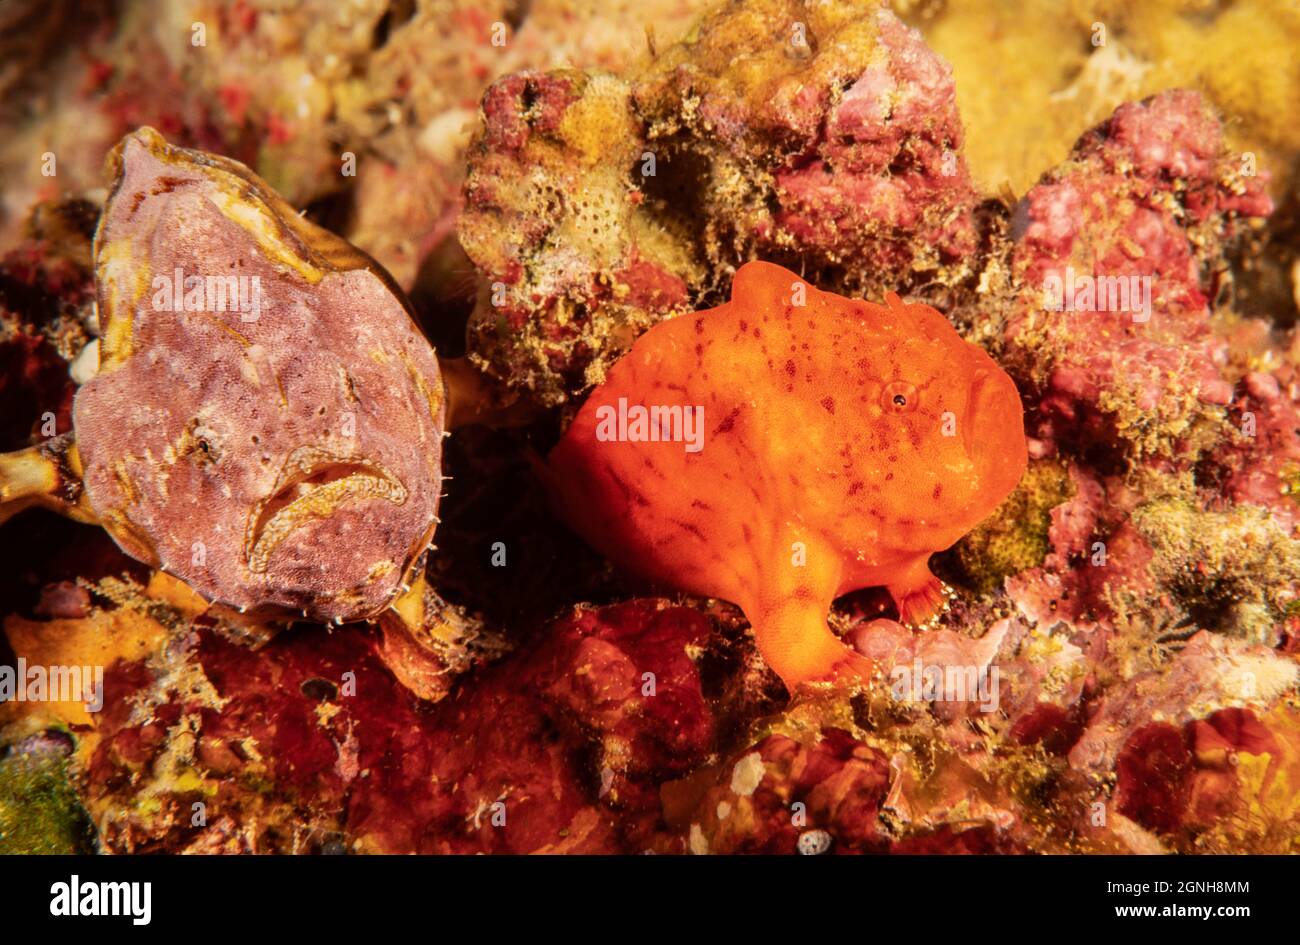 Despite the differences in appearance, both of these are reticulated frogfish, Antennatus tuberosus, sometimes referred to as a tuberculated frogfish, Stock Photo